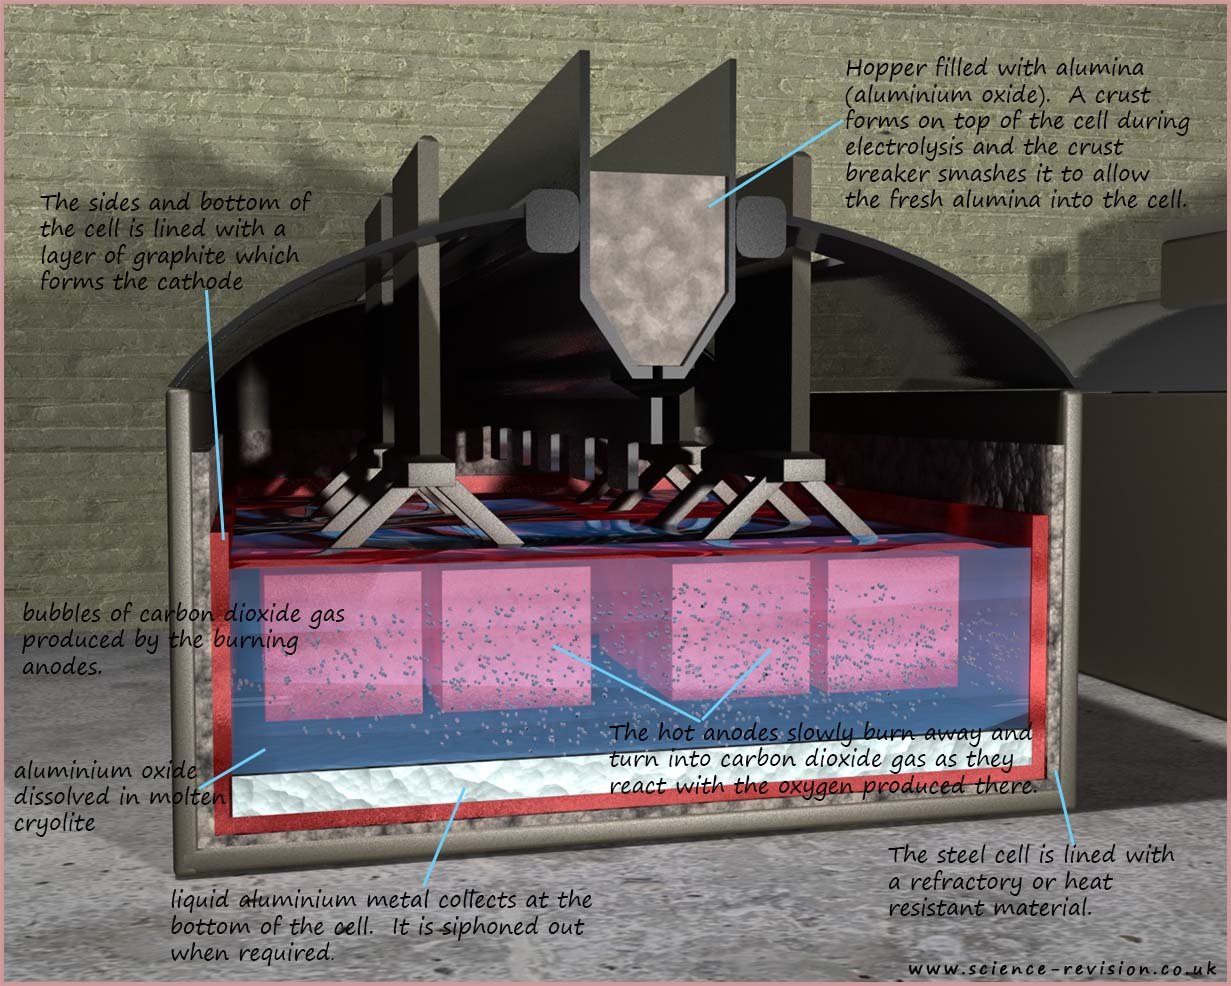 Labelled diagram of the Hall-Heroult cell used to extract aluminium metal from its ore.